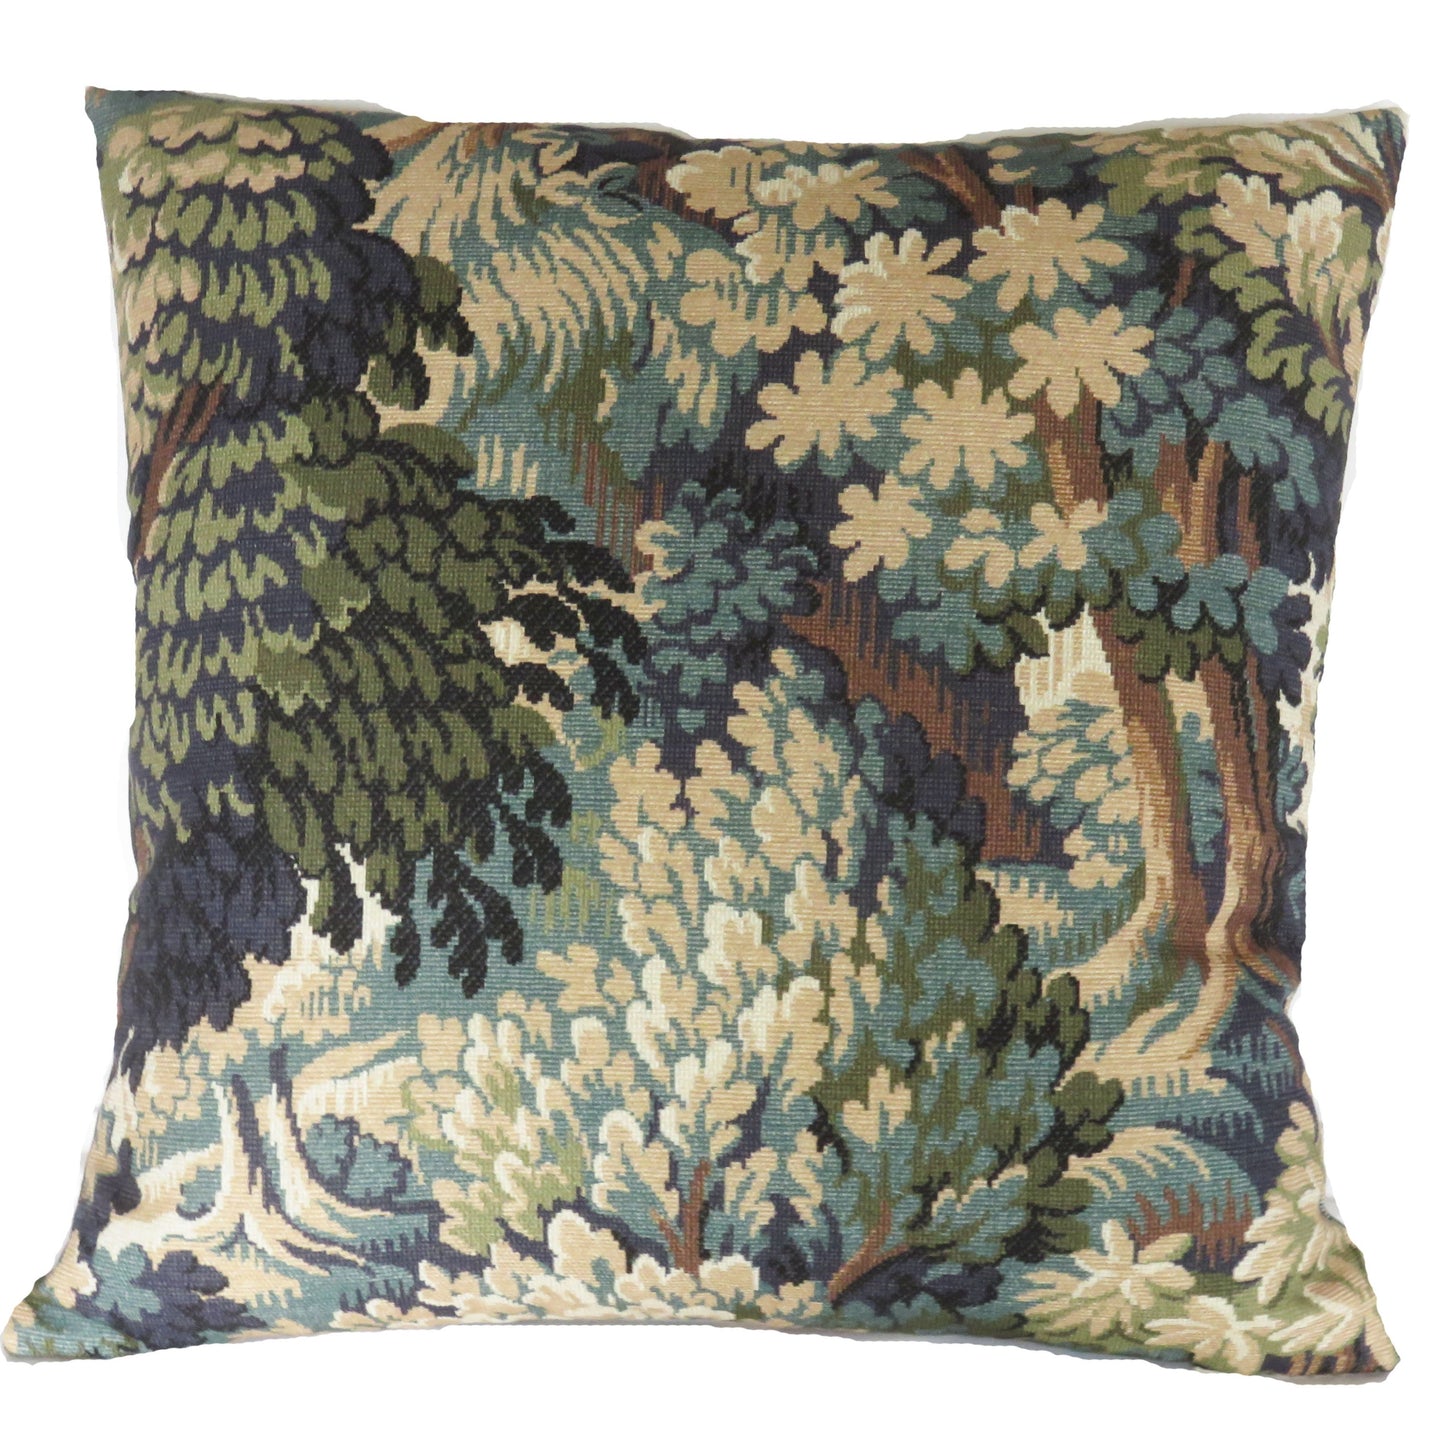 Green forest pillow cover, made from P kaufmann into the woods cotton print of a tapestry verdure scene of trees, in shades of teal, olive, blue,  brown, and cream